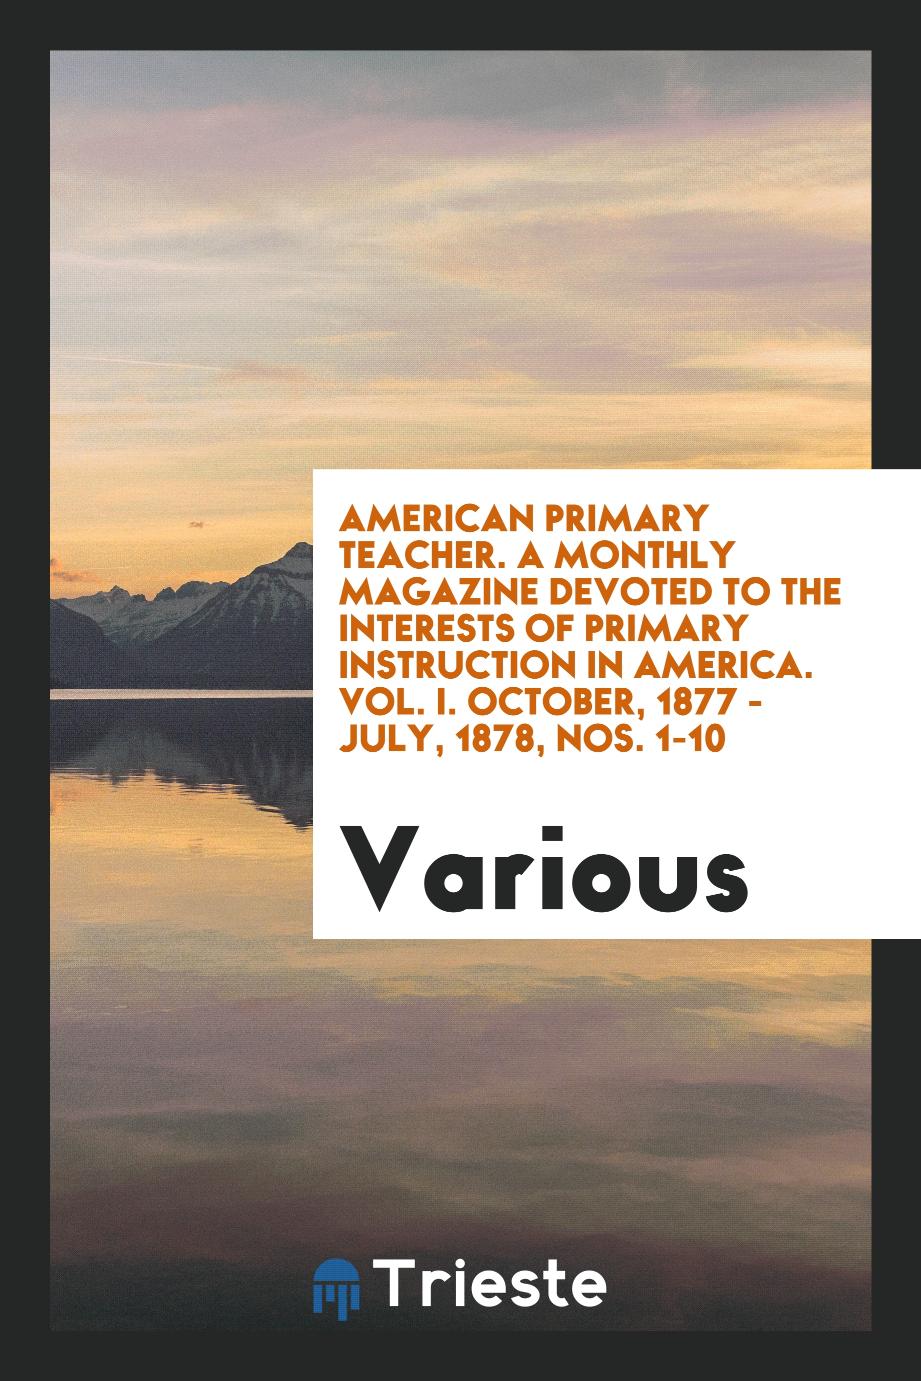 American Primary Teacher. A Monthly Magazine Devoted to the Interests of Primary Instruction in America. Vol. I. October, 1877 - July, 1878, Nos. 1-10